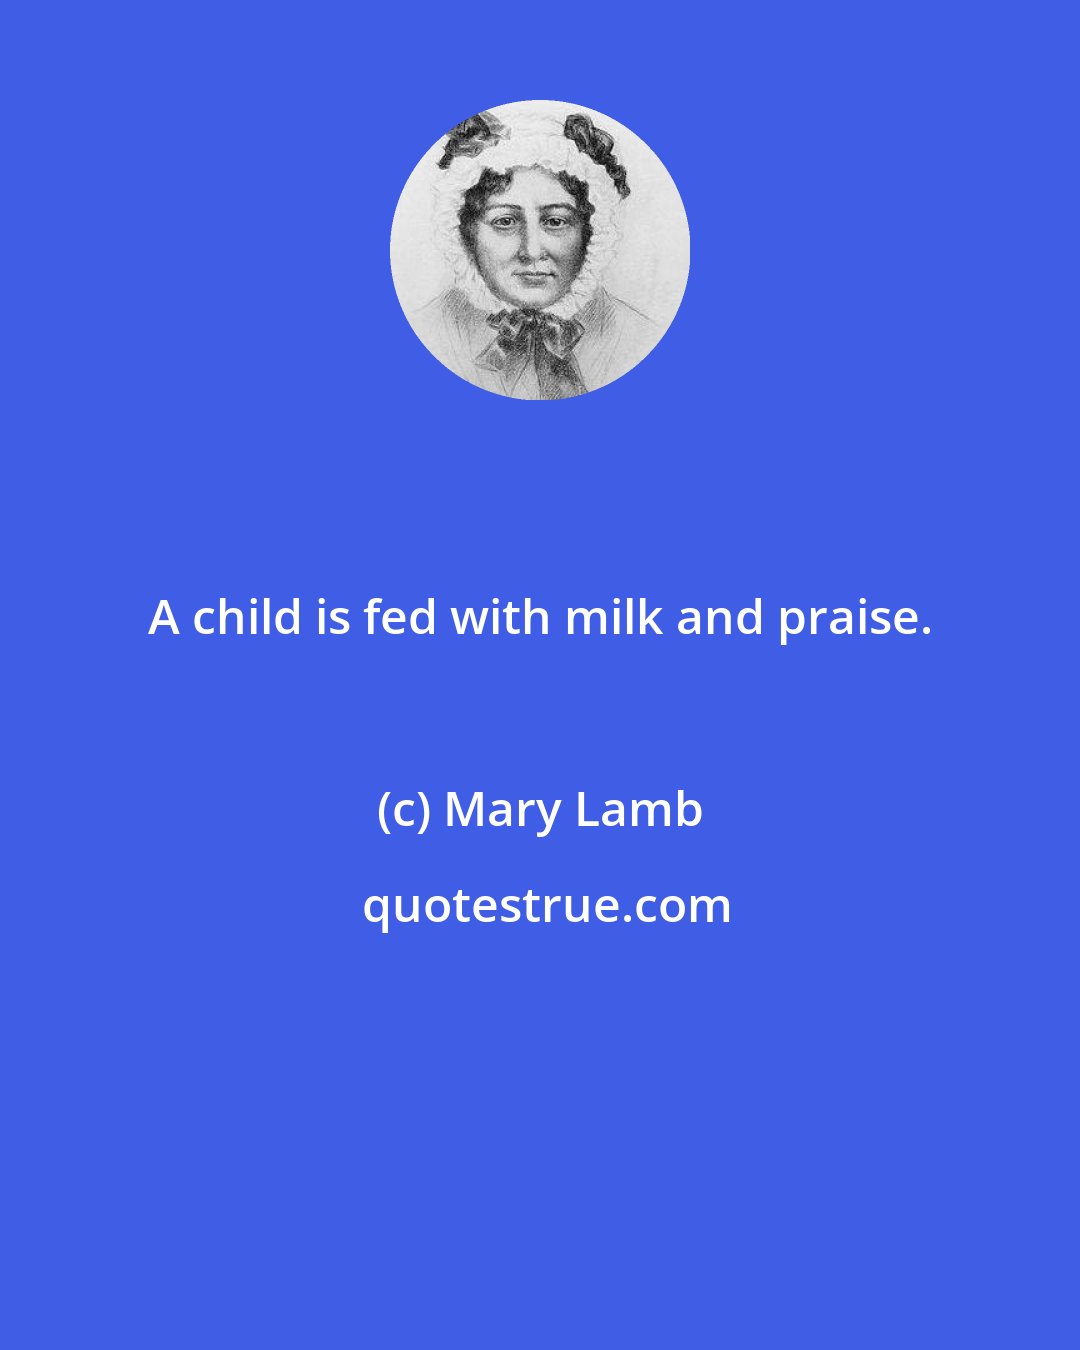 Mary Lamb: A child is fed with milk and praise.